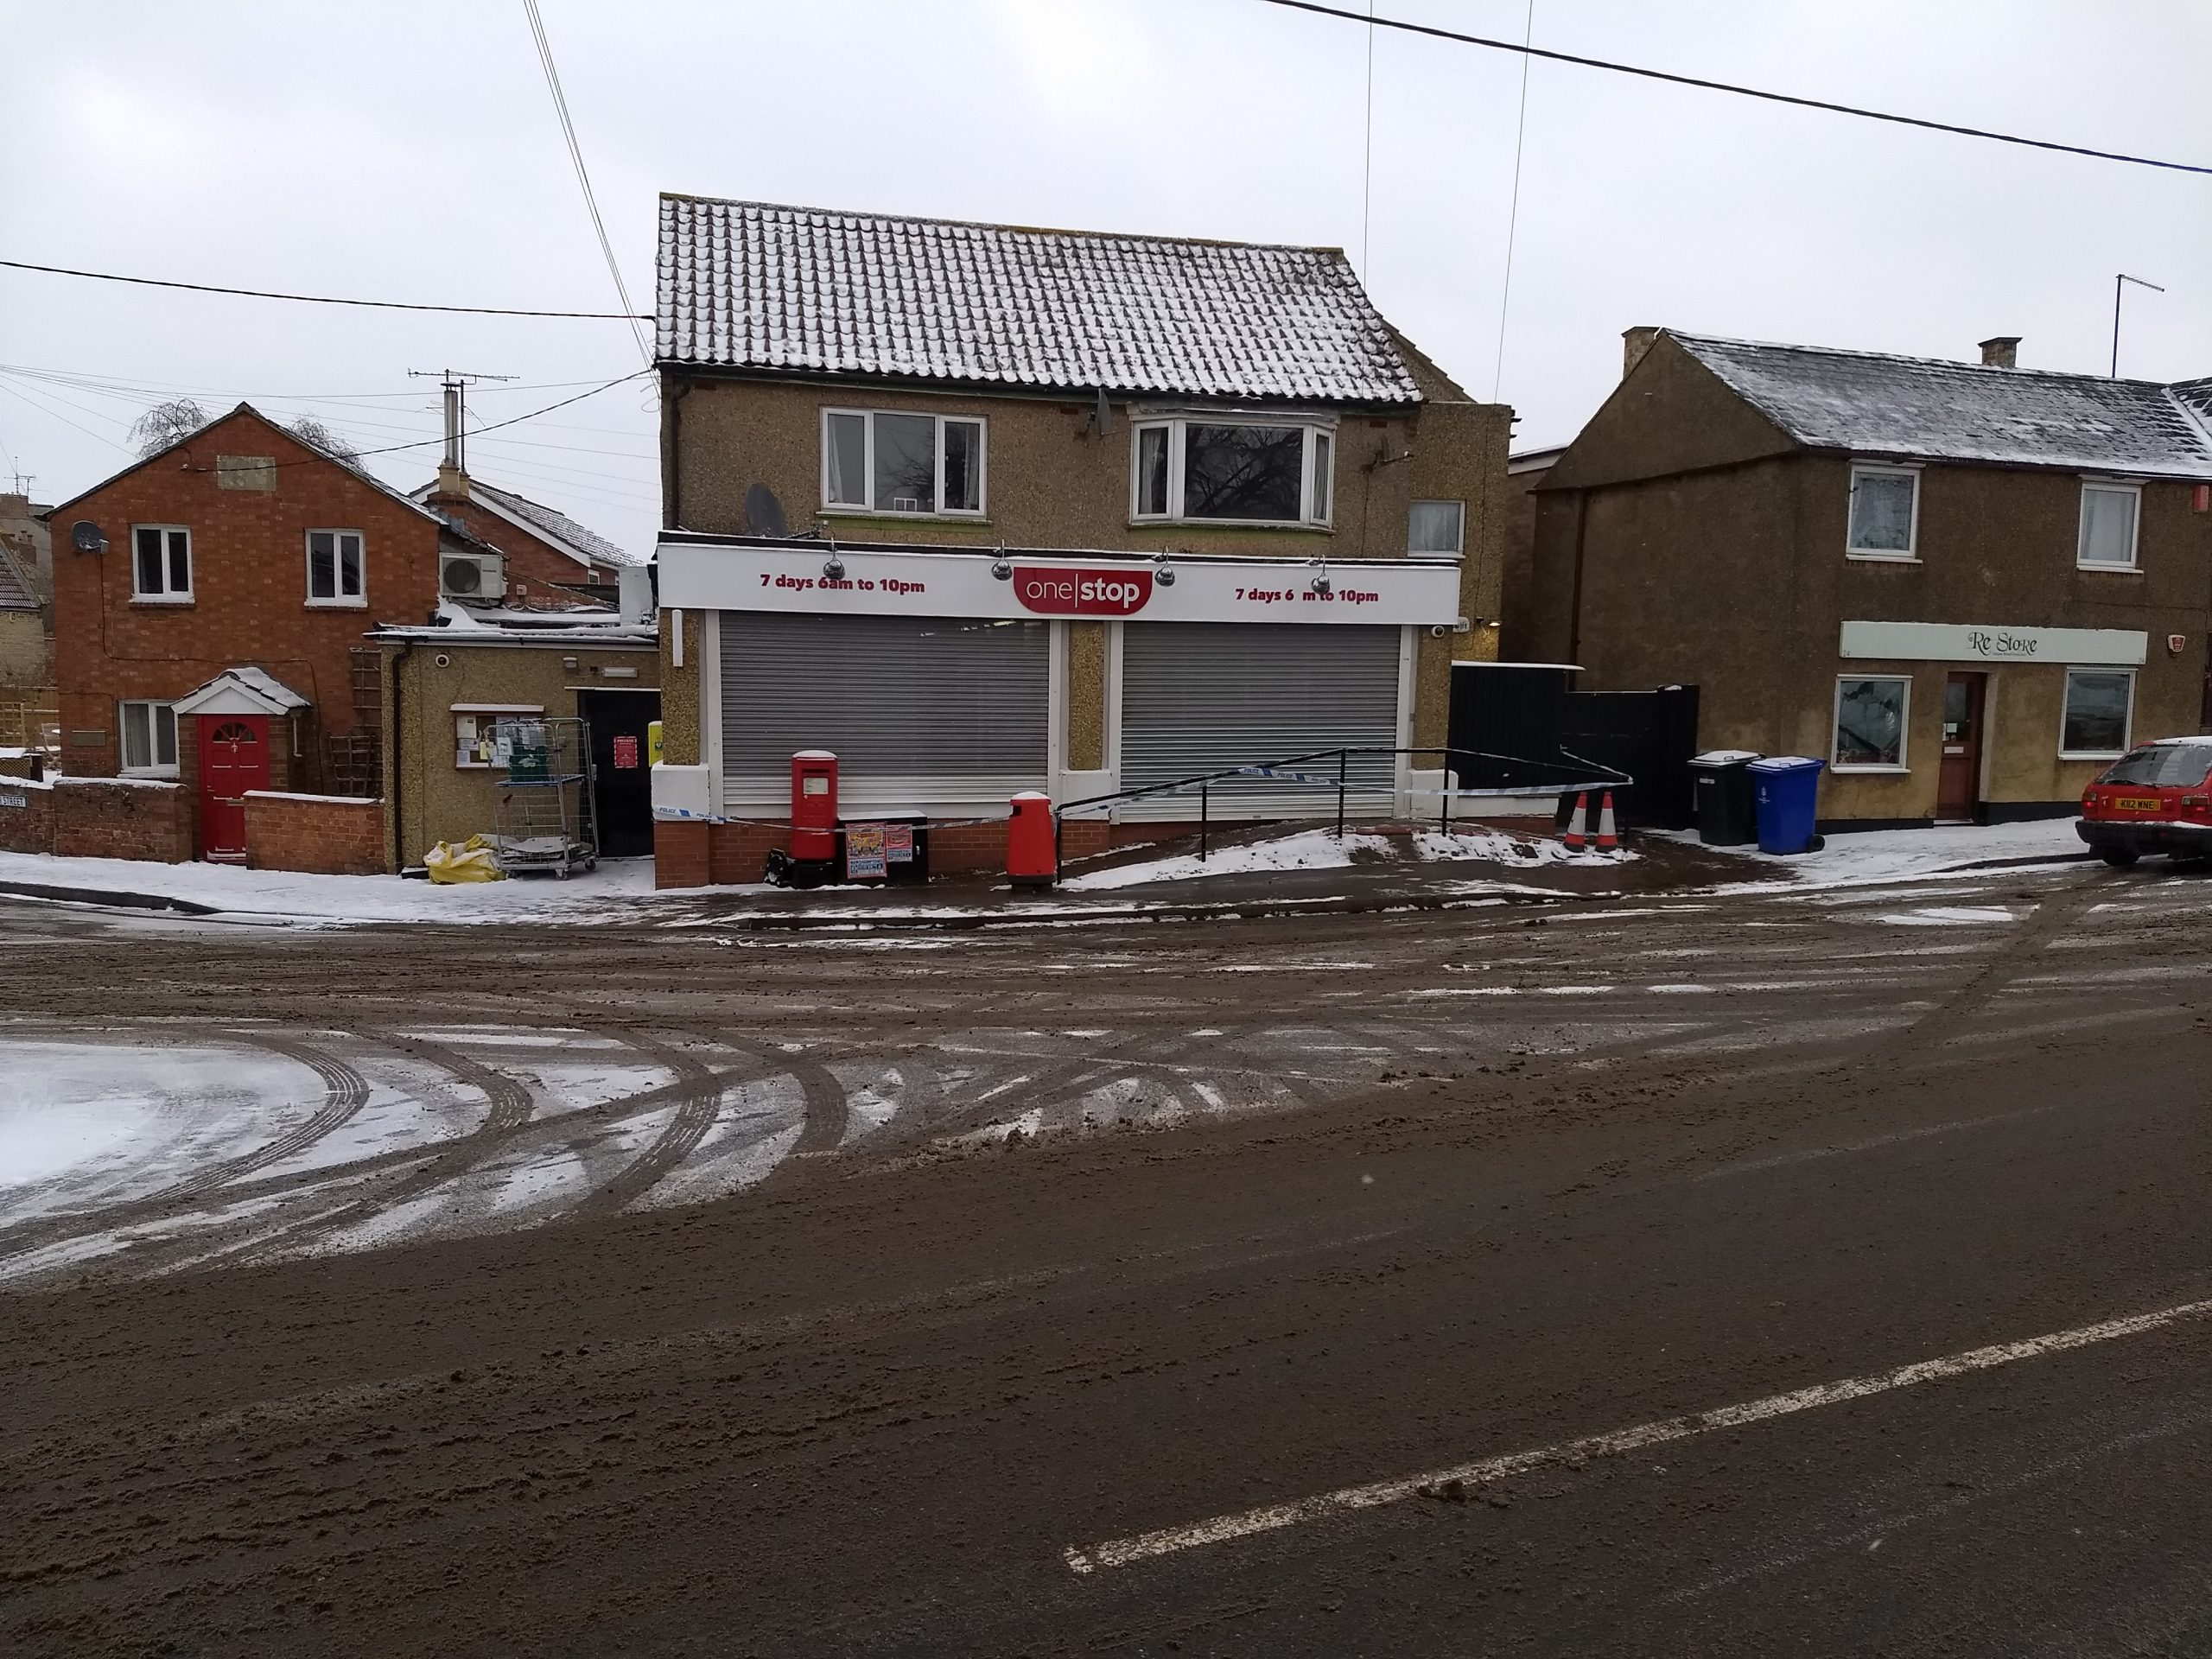 nether hayford post office armed robbery